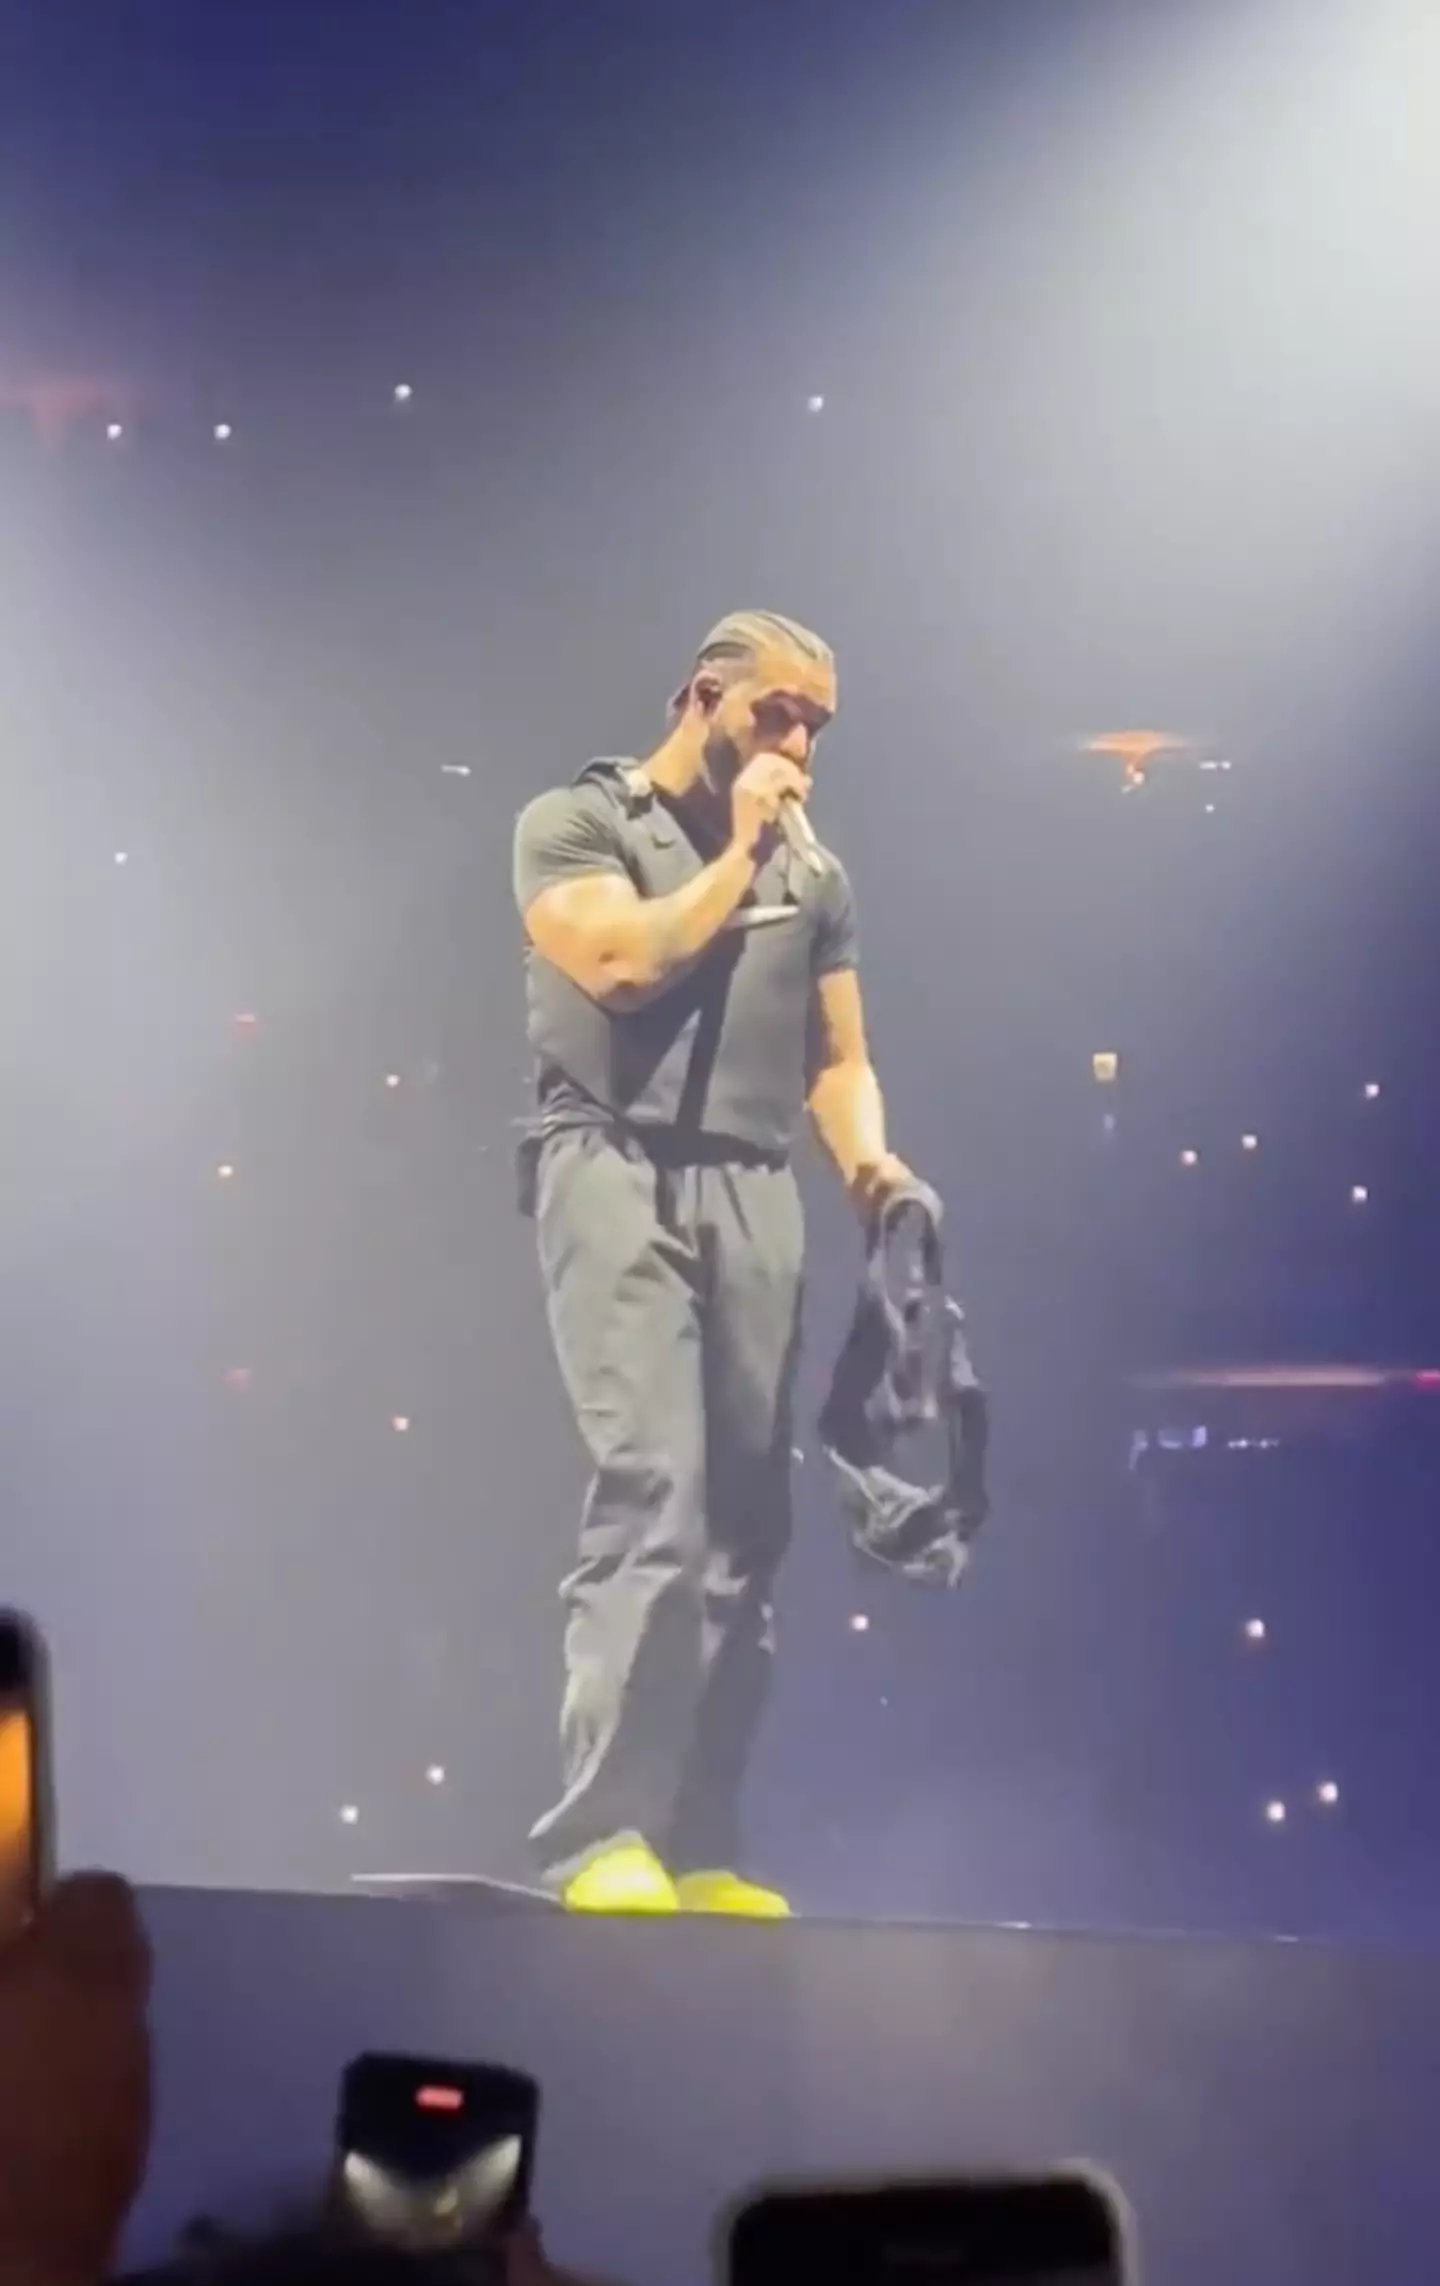 Drake catches another bra at his concert.